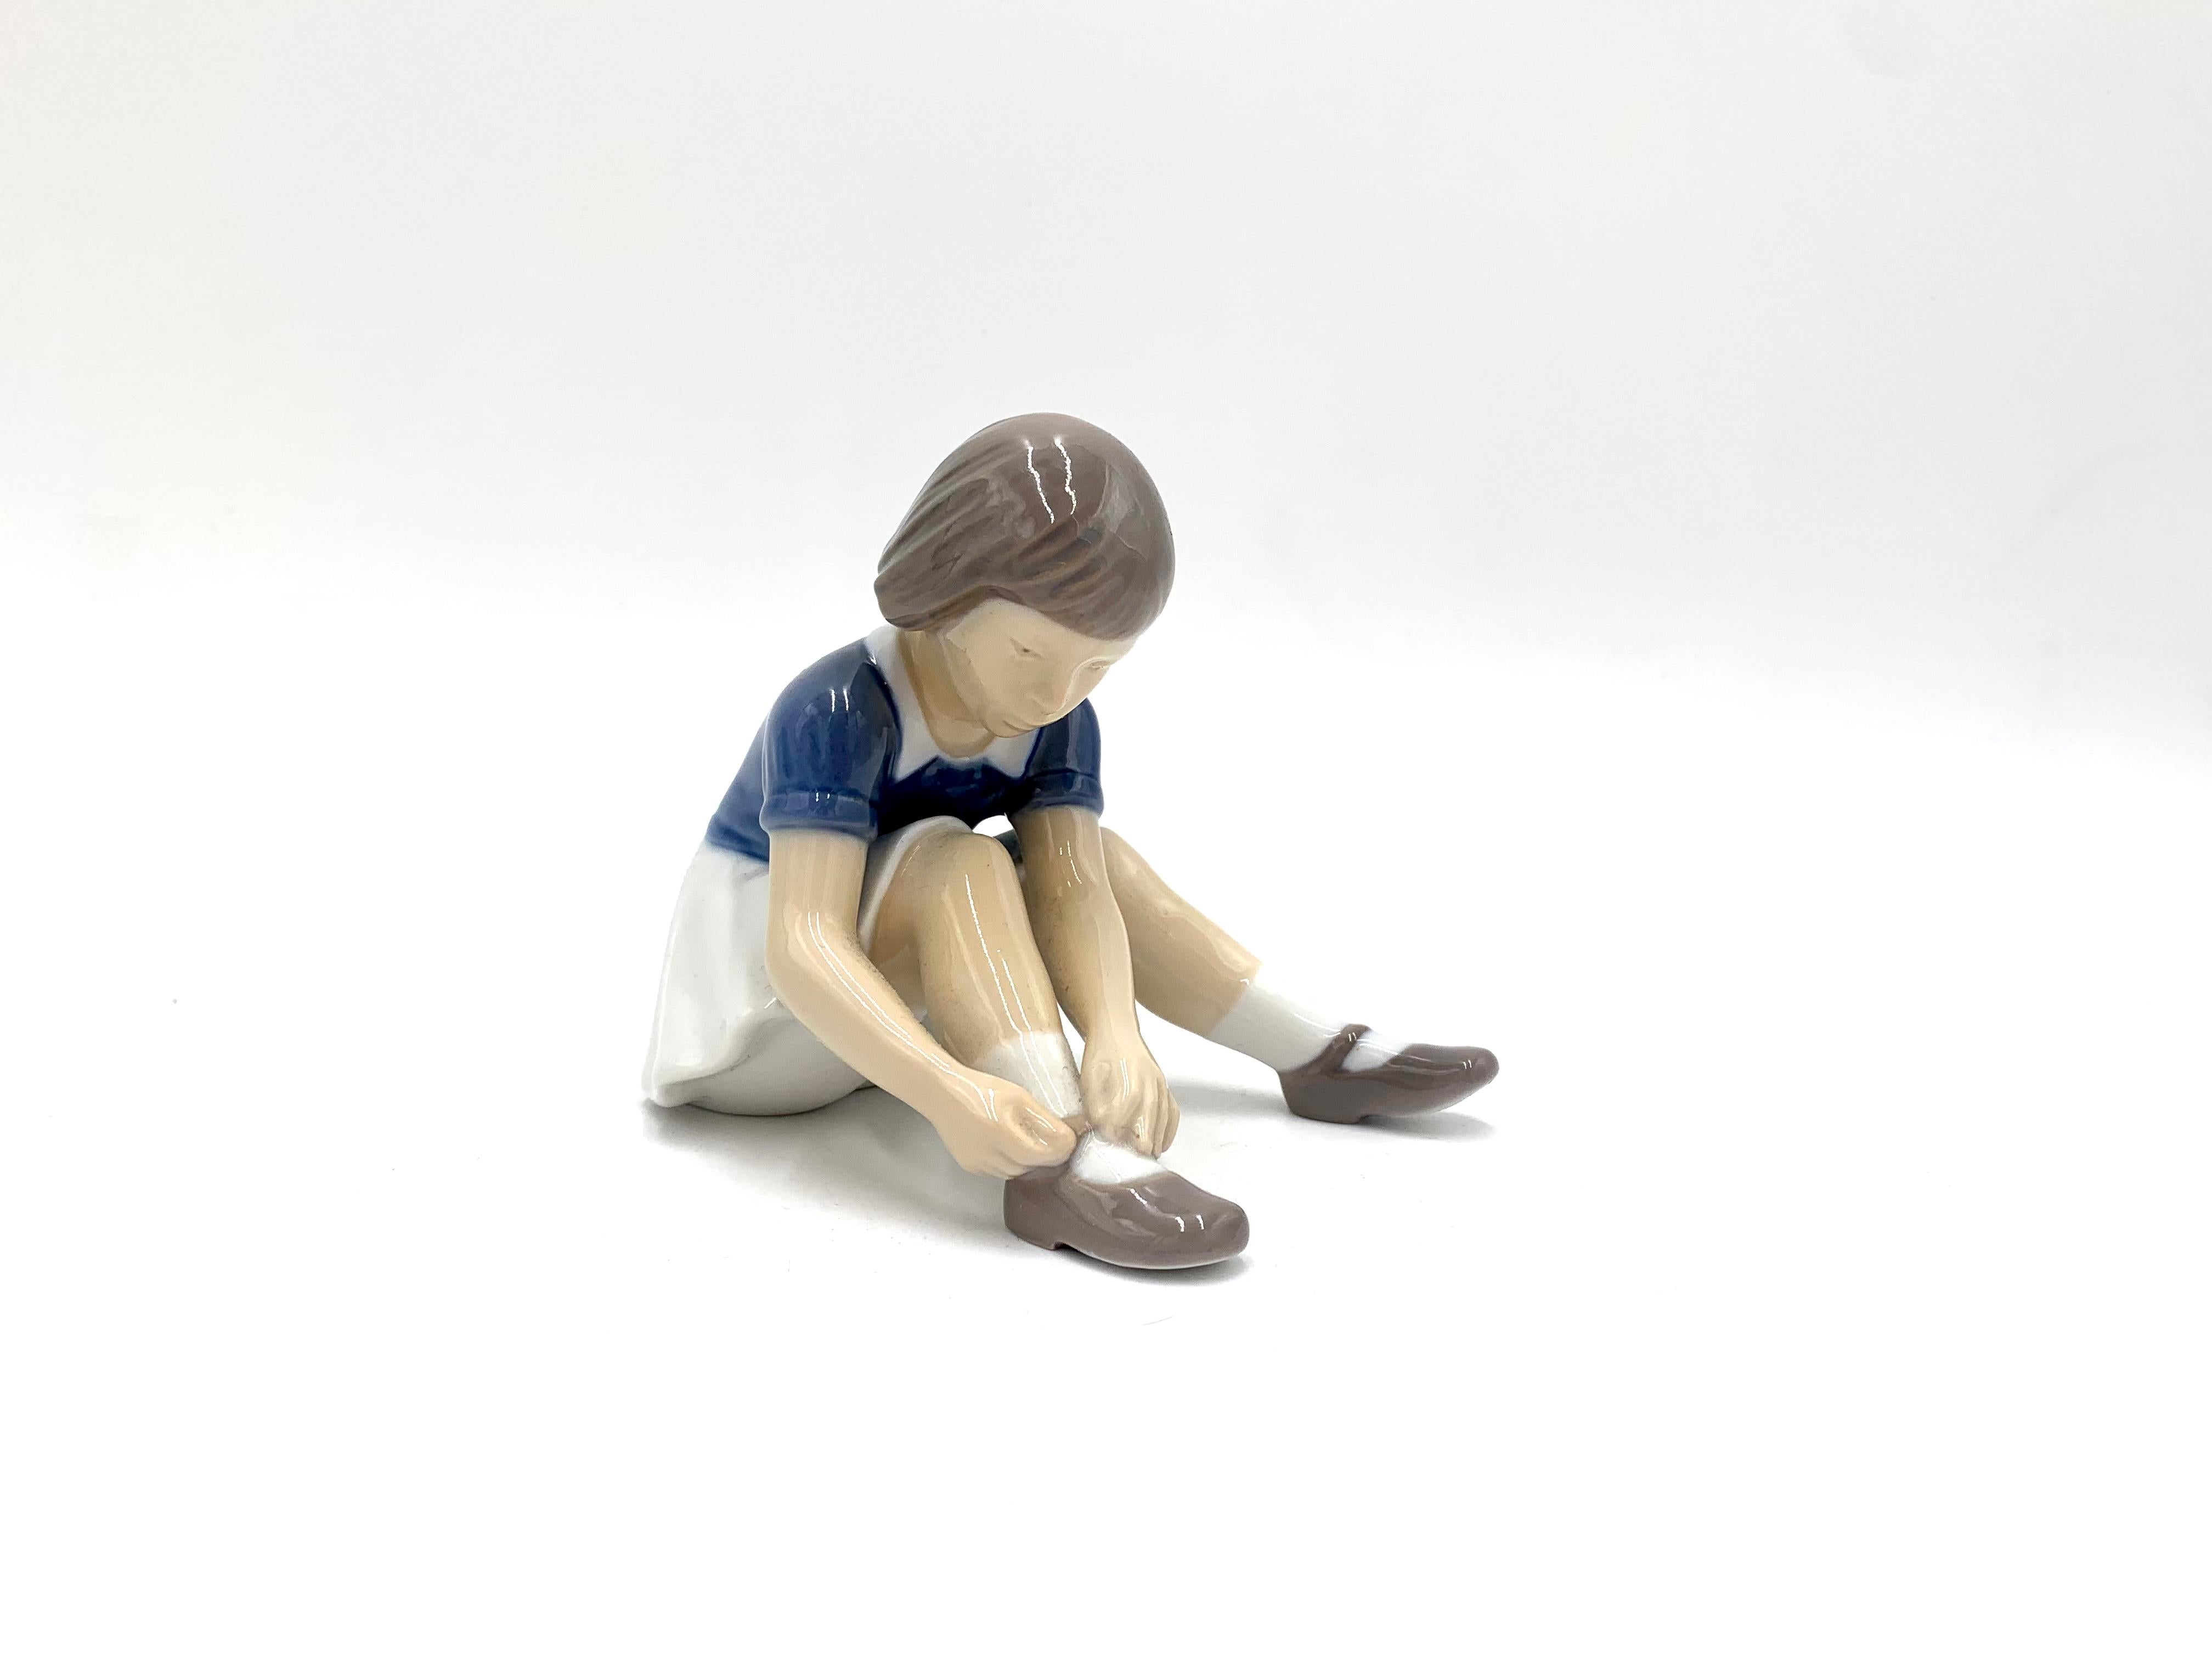 Porcelain figurine of a girl lacing up her shoes

Made in Denmark by Bing & Grondahl

Produced in 1950-1965

Model number # 2317

Very good condition, no damage

Measures: height 10cm, width 9cm, depth 12cm.